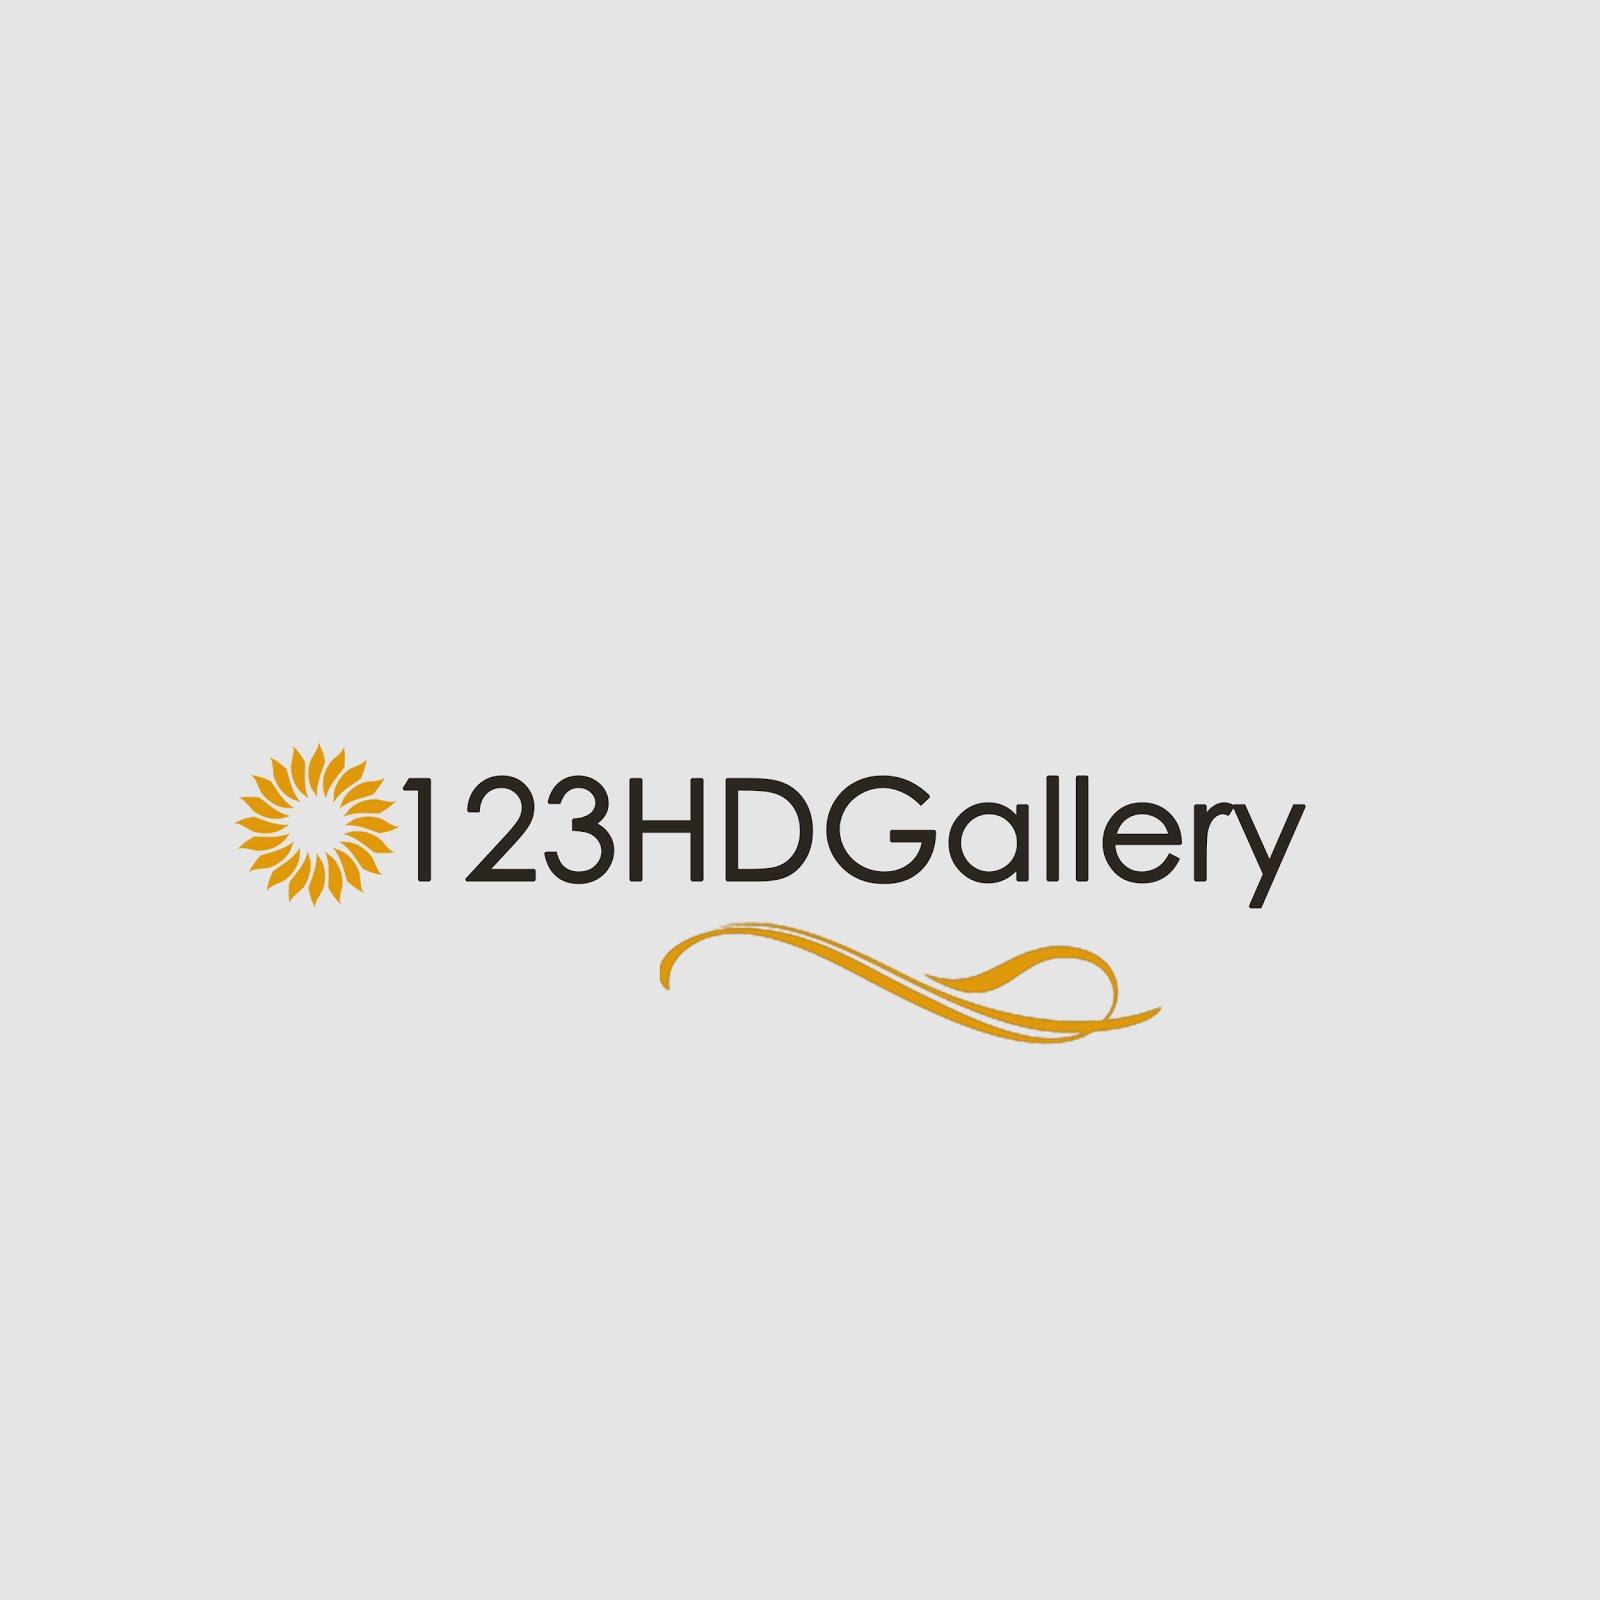 123HDgallery